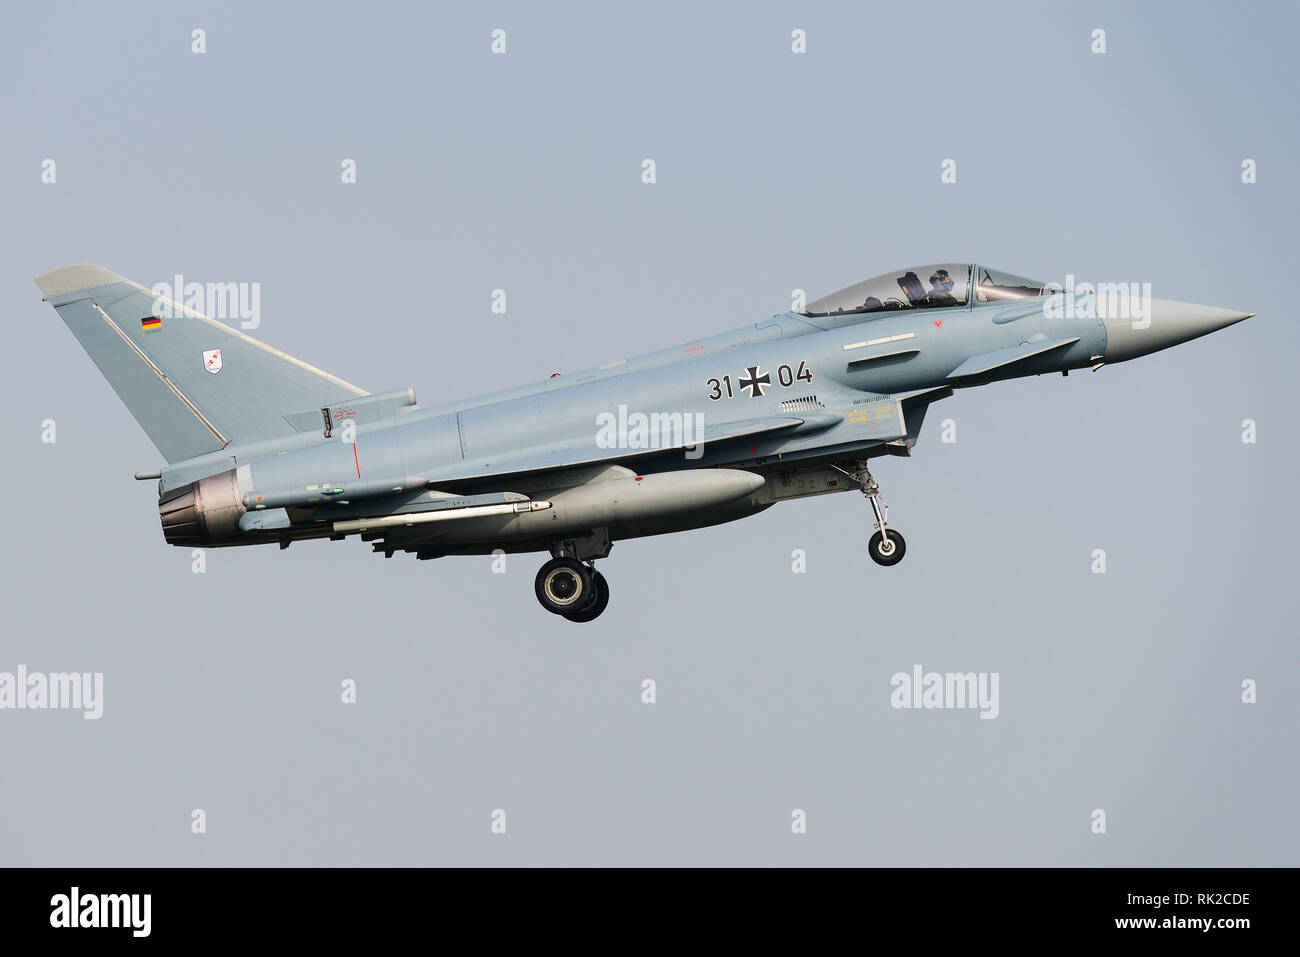 A Eurofighter Typhoon multirole fighter jet of the German Air Force. Stock Photo